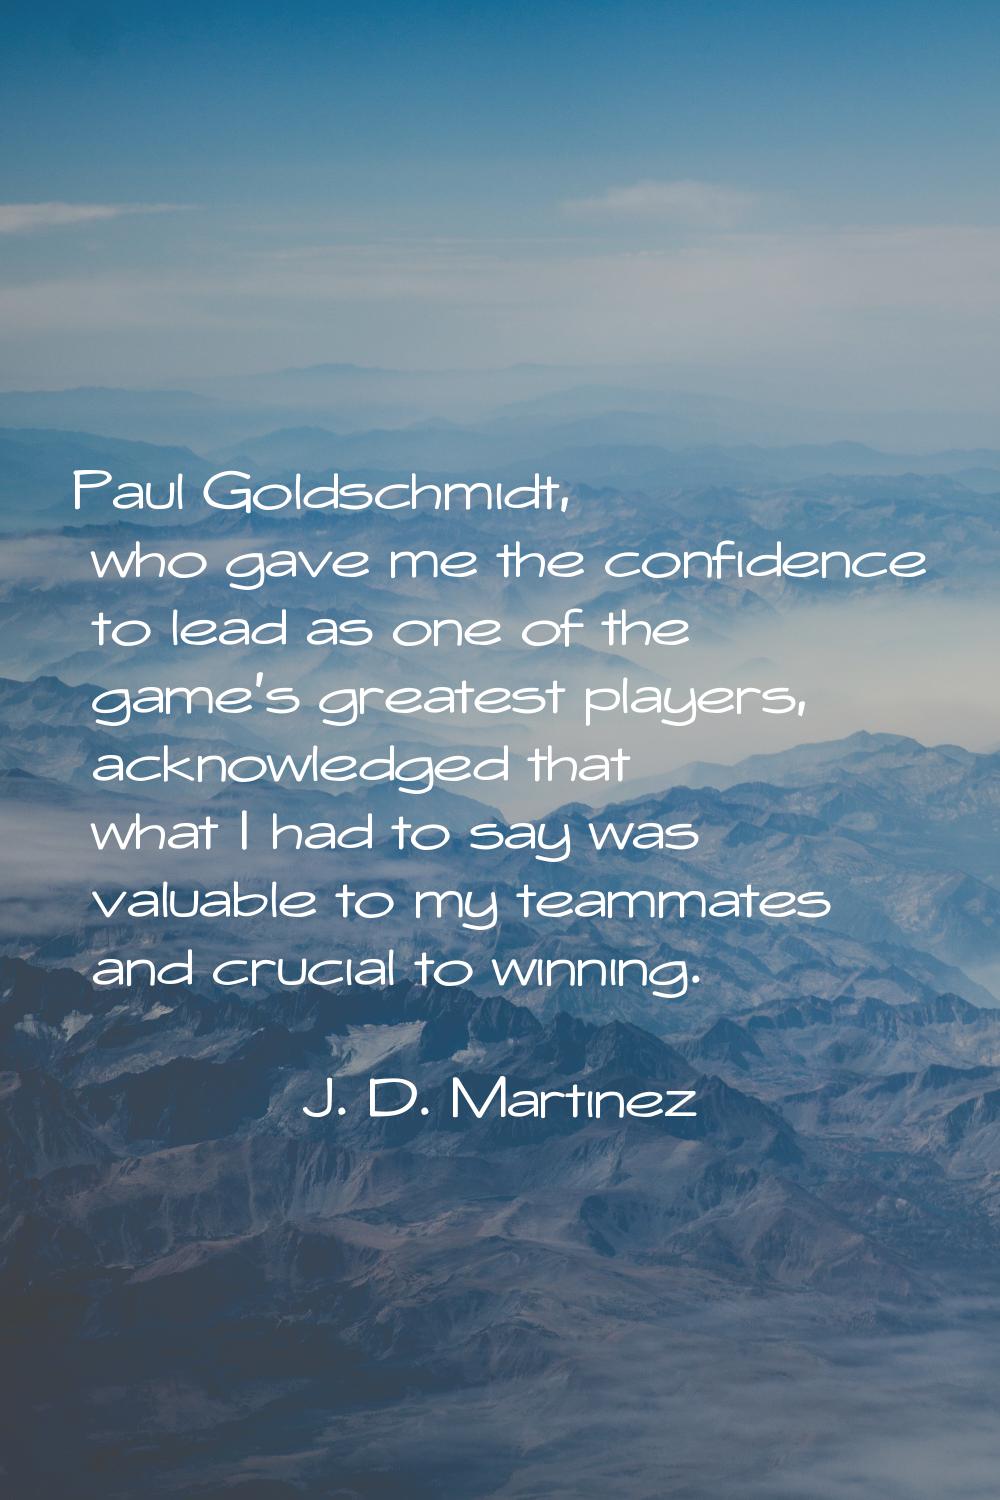 Paul Goldschmidt, who gave me the confidence to lead as one of the game's greatest players, acknowl